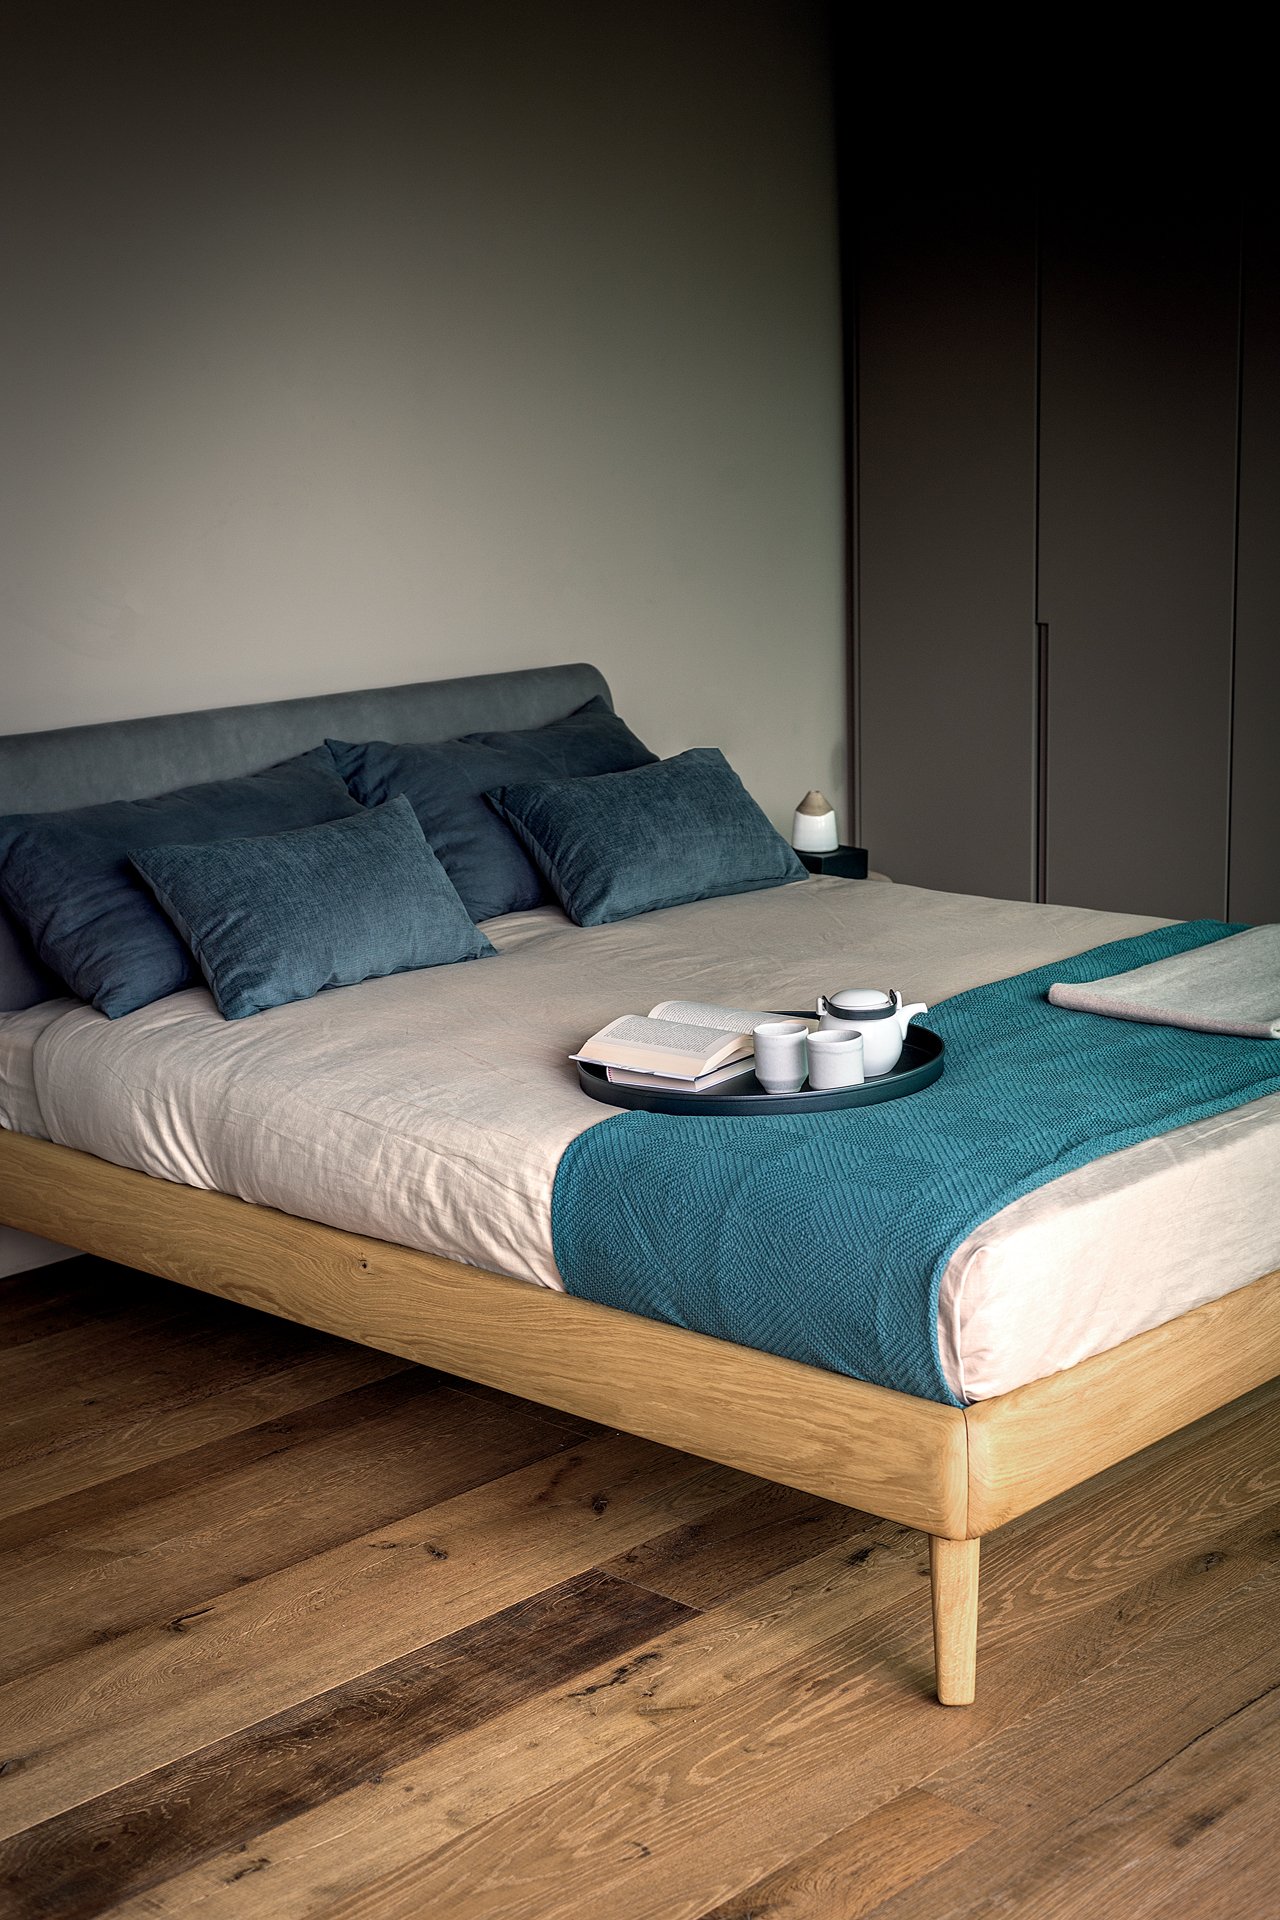 My Bed from Riva 1920, designed by Studio Zero